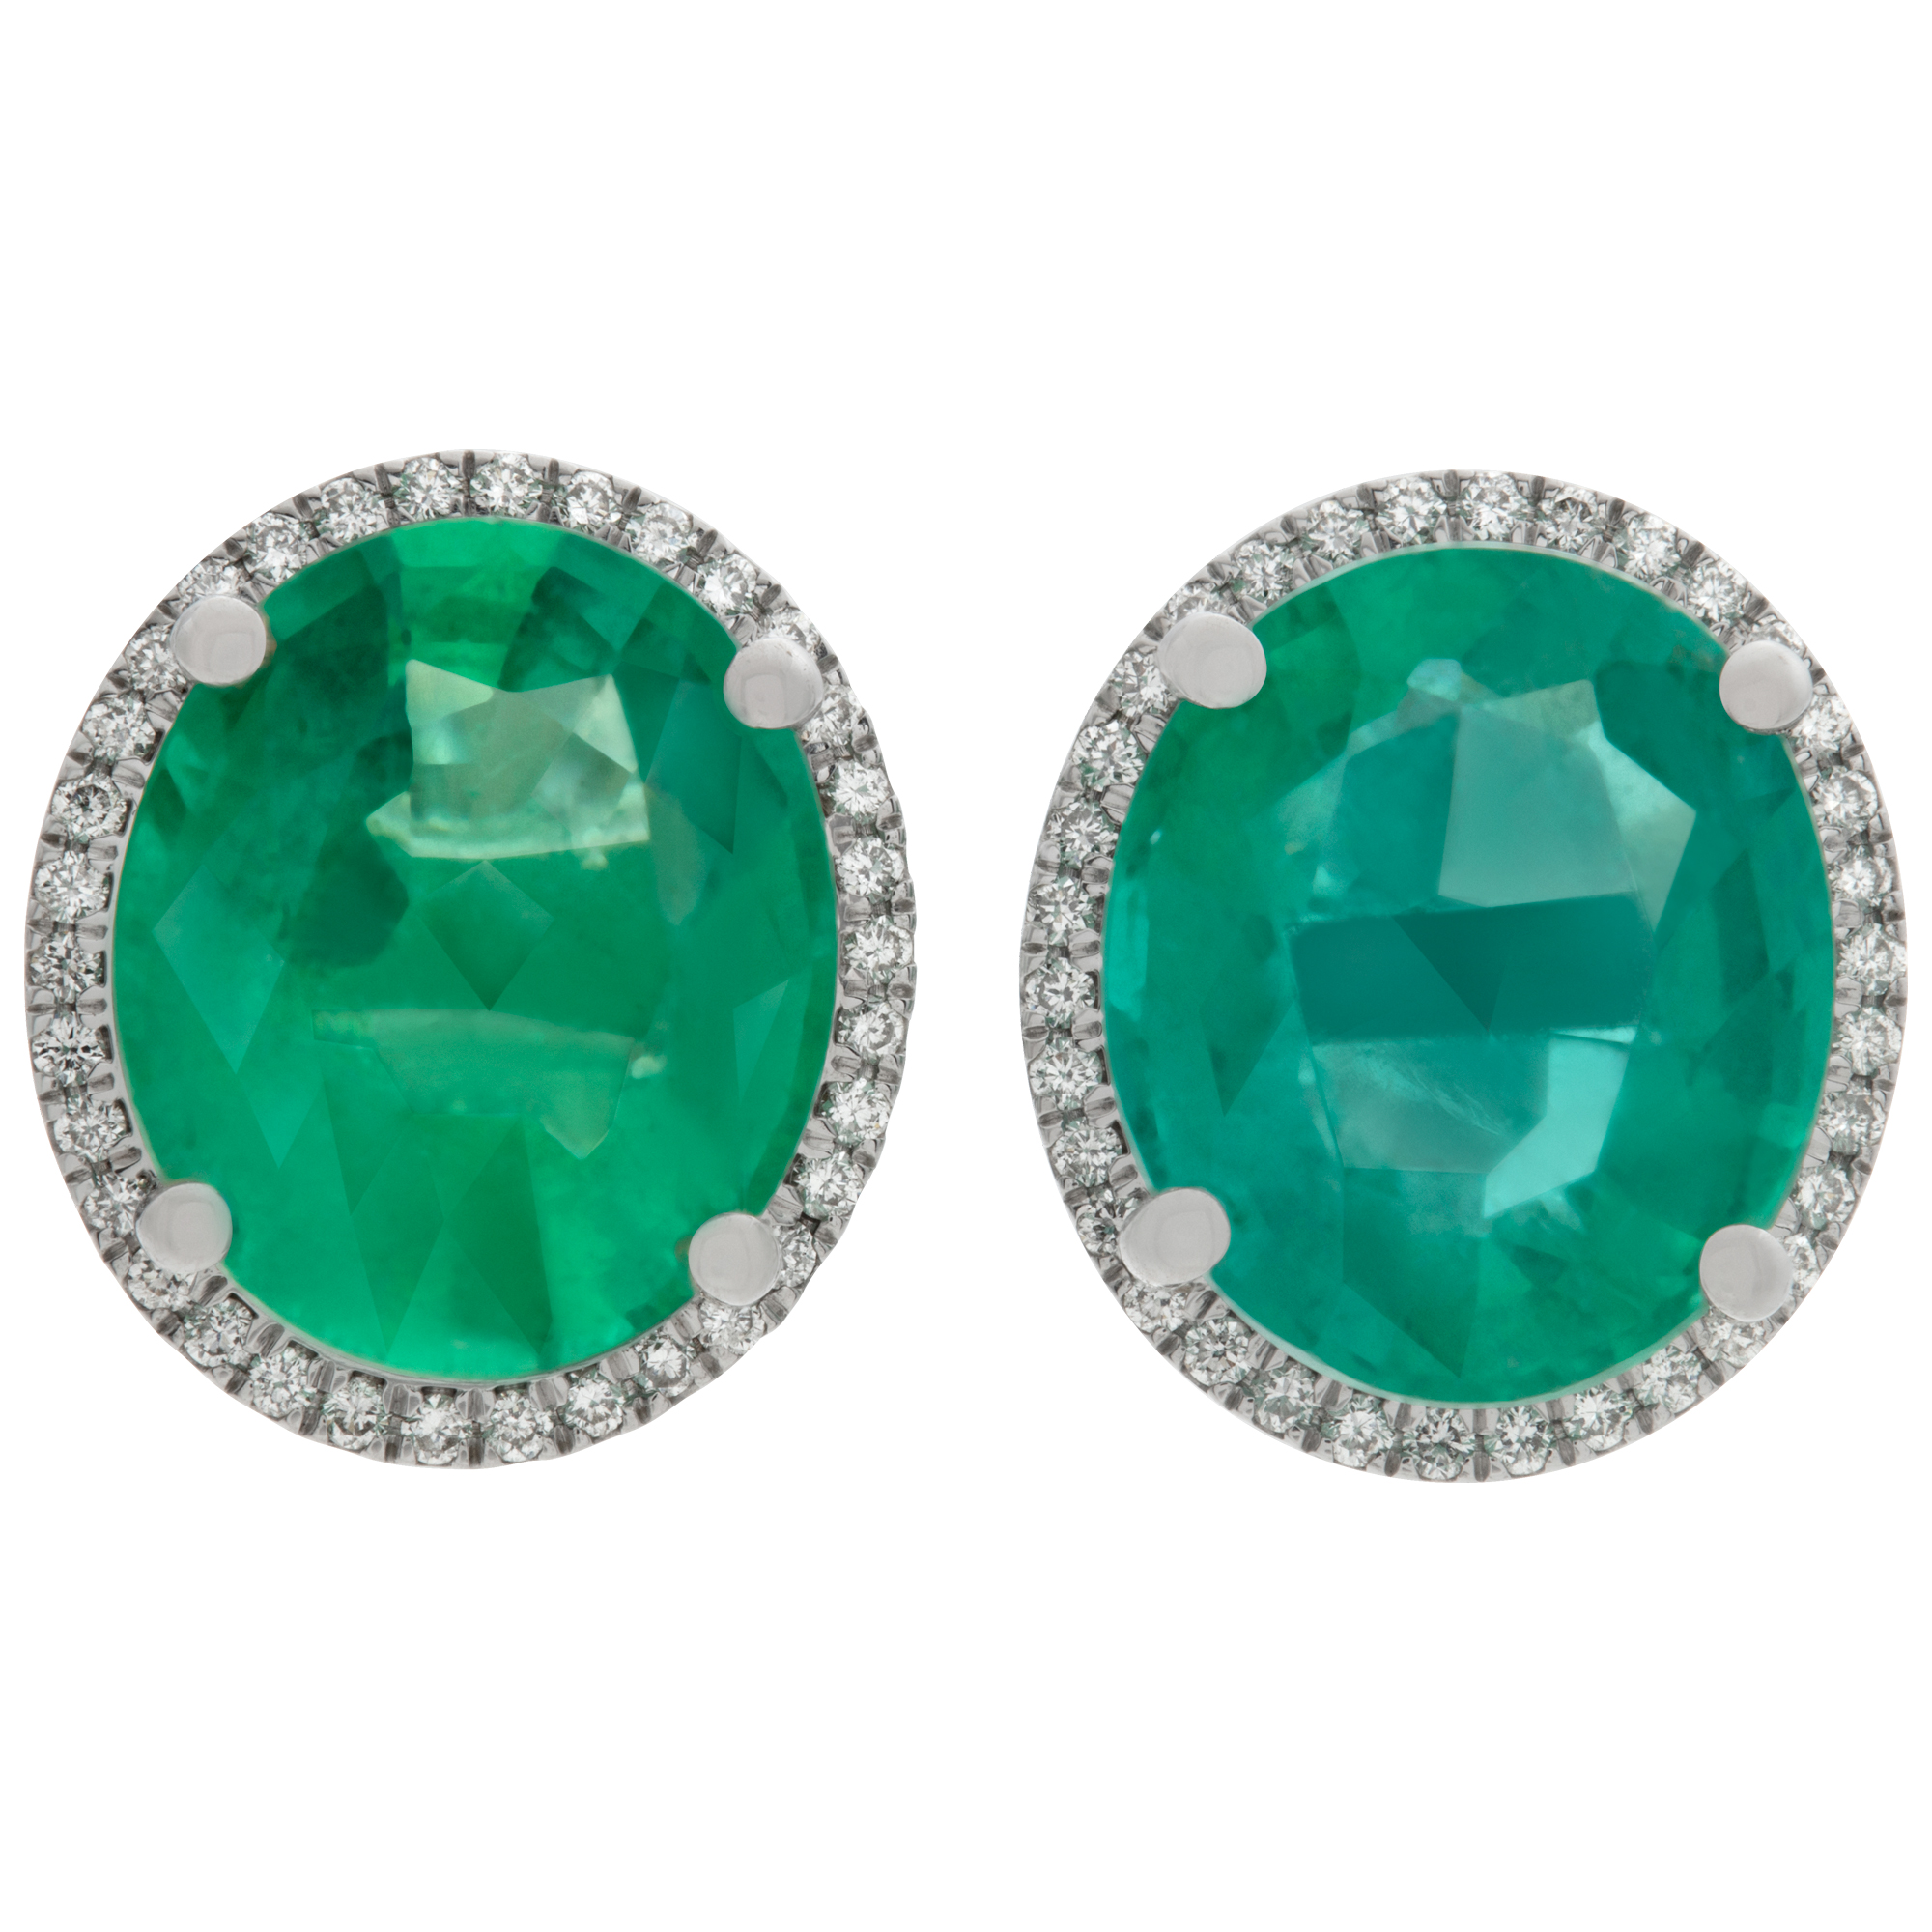 IDT certified Emeralds and diamonds stud earrings in 18k white gold. Oval brilliant cut emerald total approx. weight: 6.83 carats.